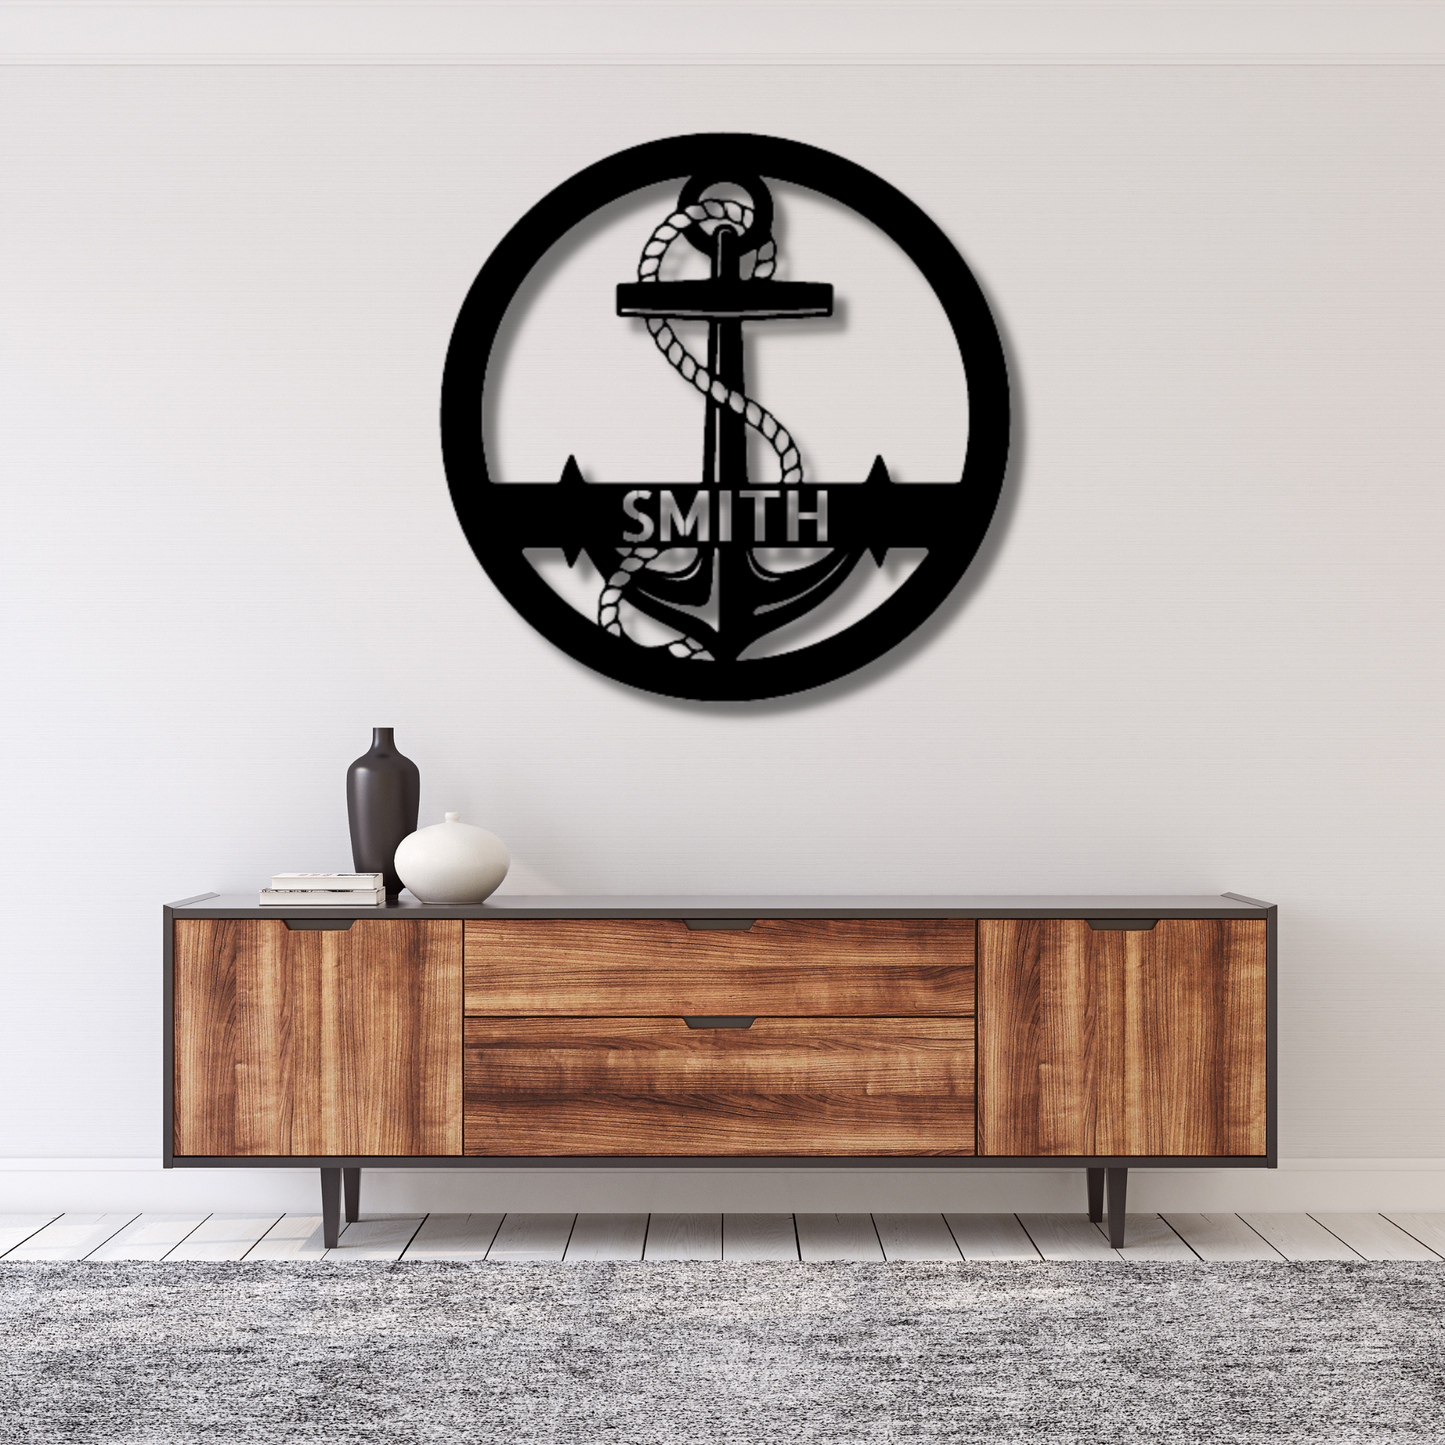 Elaborate Anchor - Steel Sign, Personalized Metal Wall Decor, House Decor, Wall Art, Metal Signs, Metal Decorative Sign